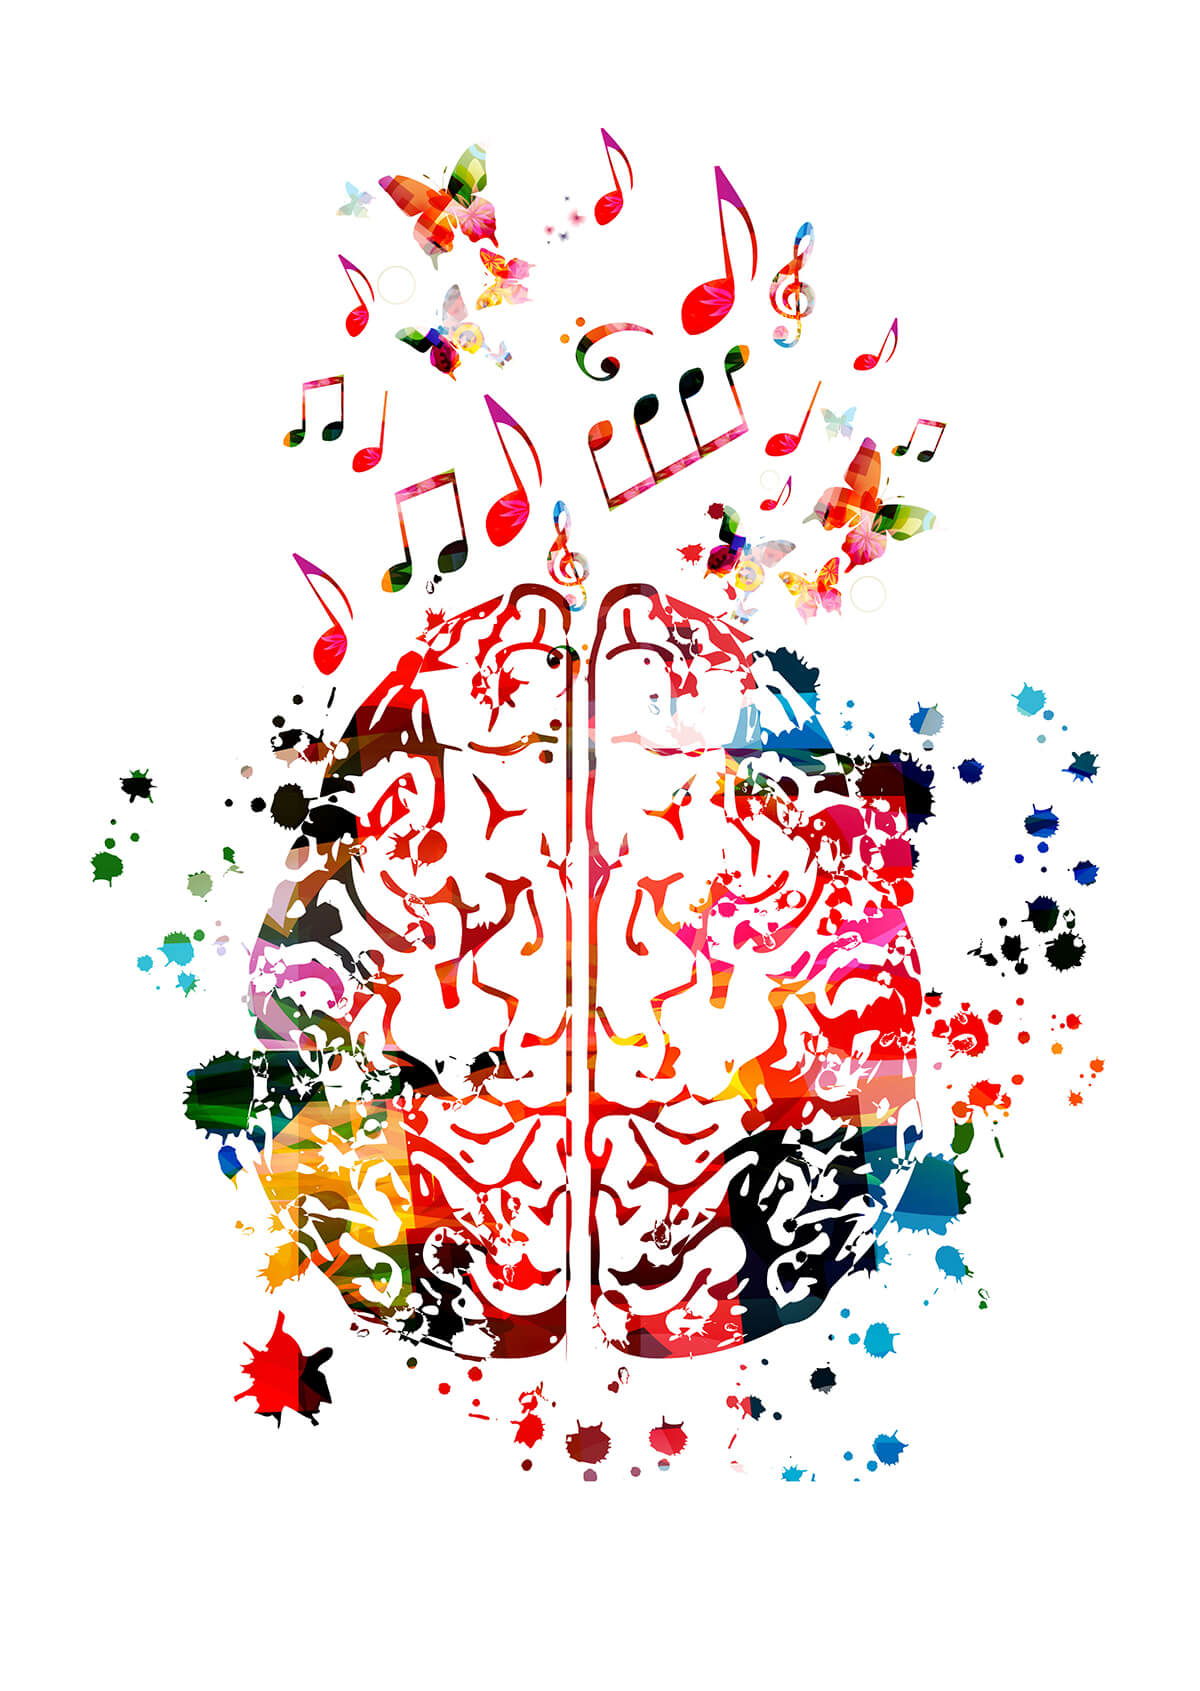 Brain illustration with color and musical notes - Two queer people creating a heart. Queer counselling in Berlin, specialising in guided imagery and music.